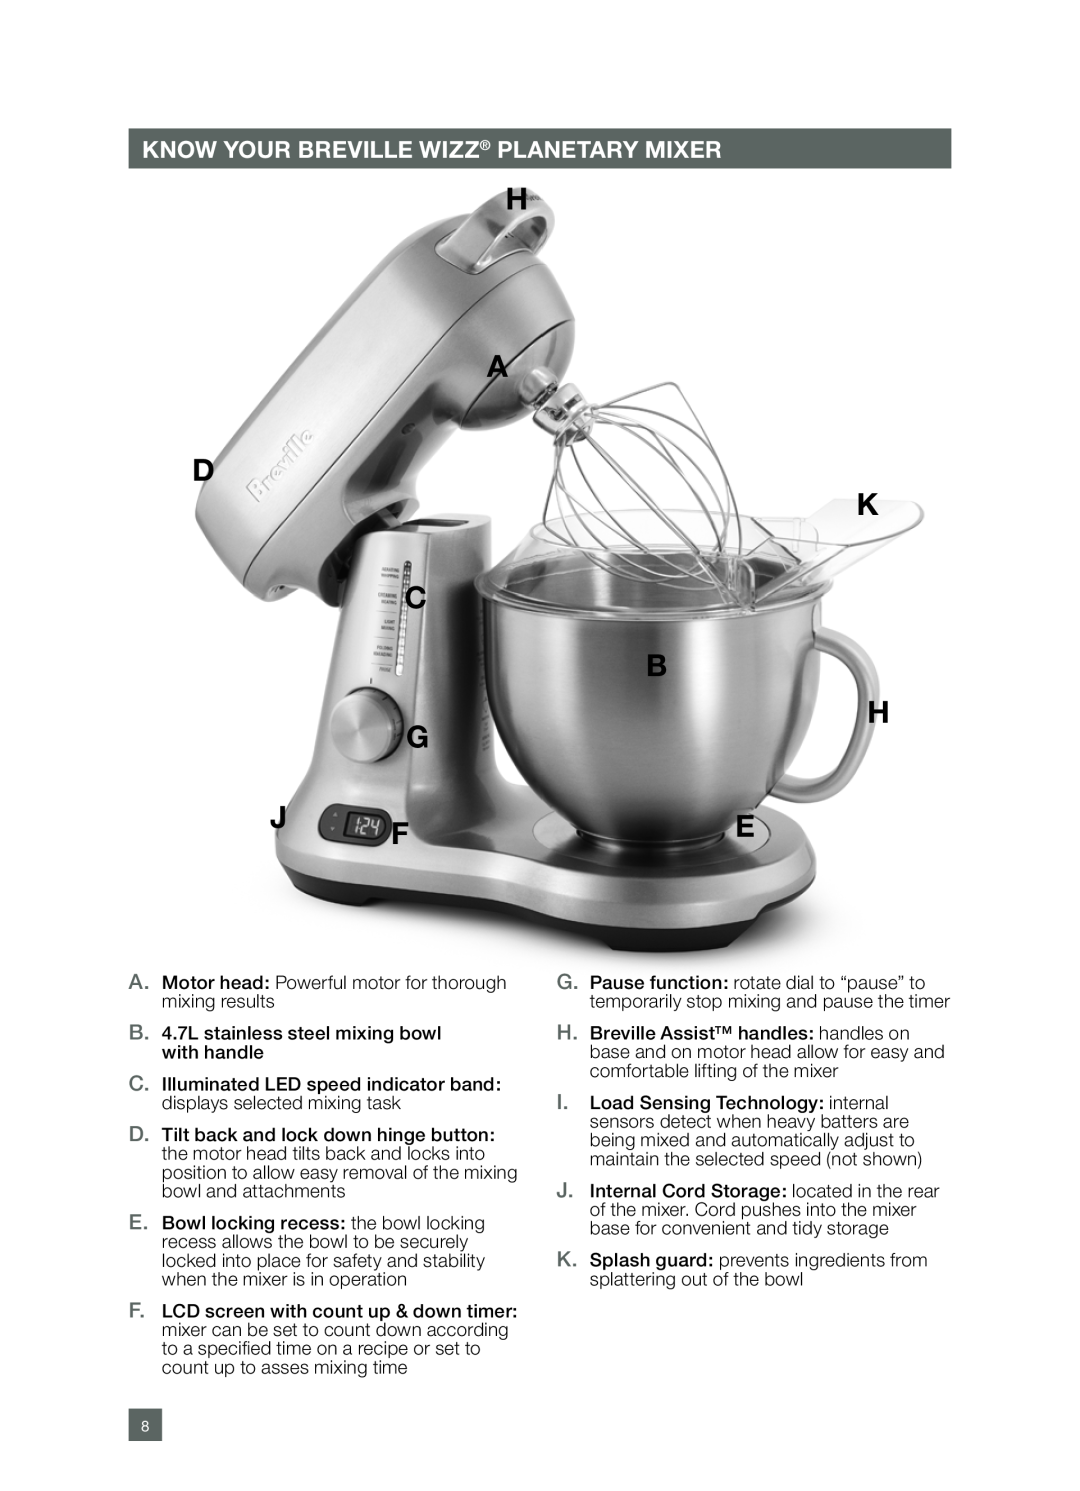 Breville BEM800 manual H A D, Know Your Breville Wizz Planetary Mixer 